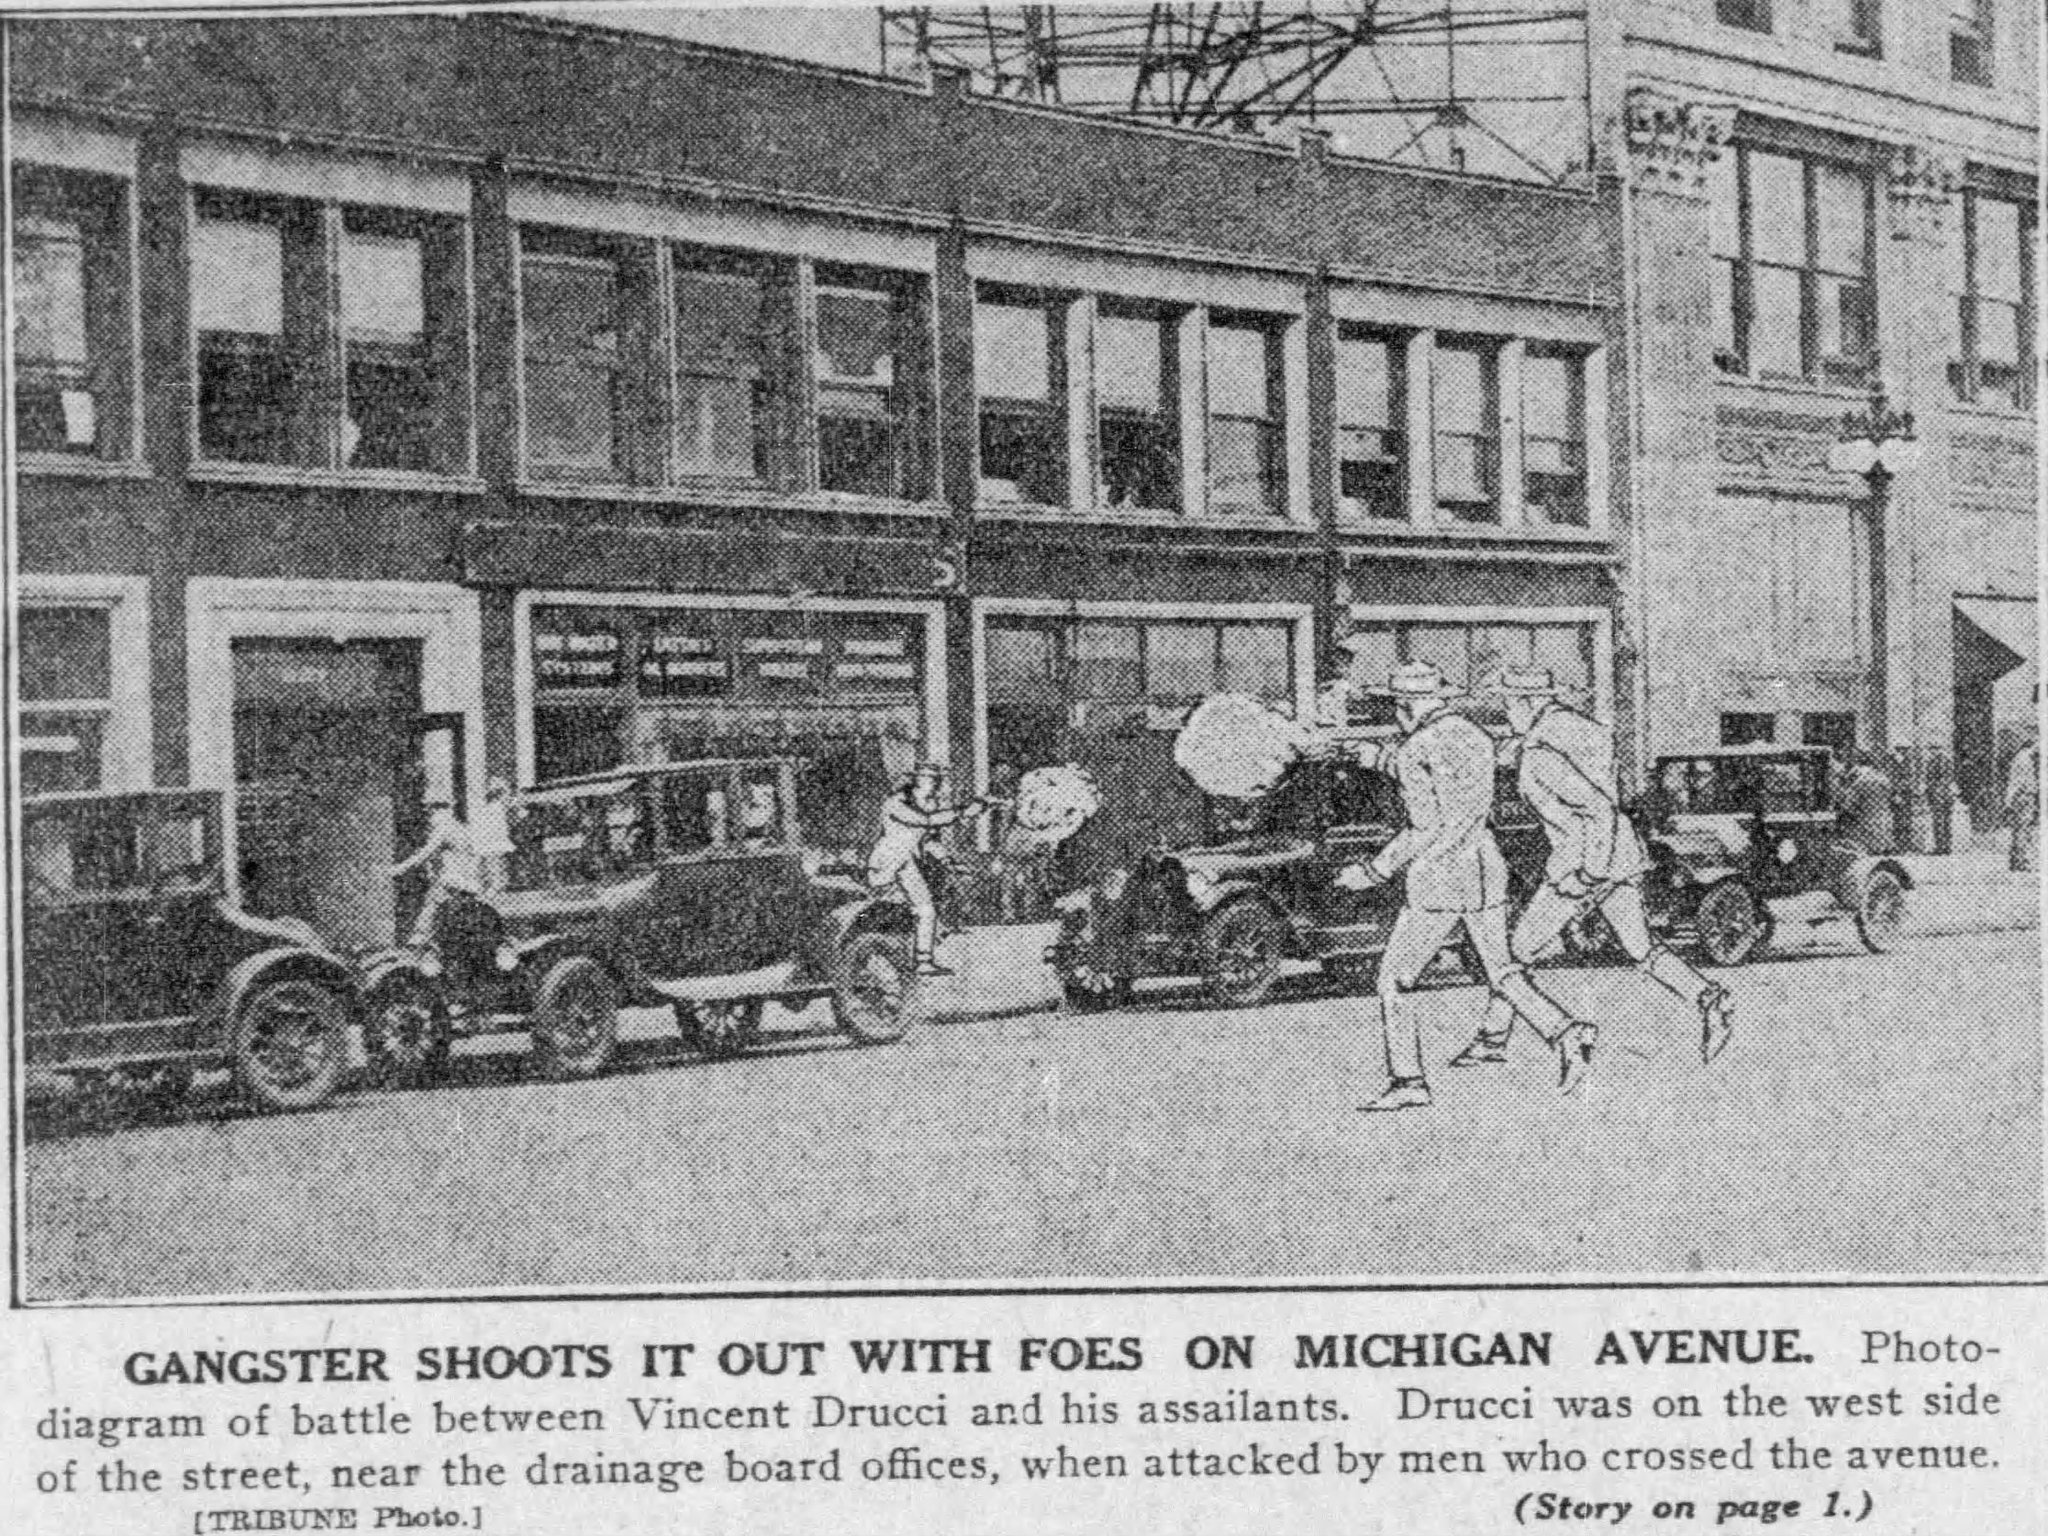 Weiss and Drucci shoot out with Capone gunmen